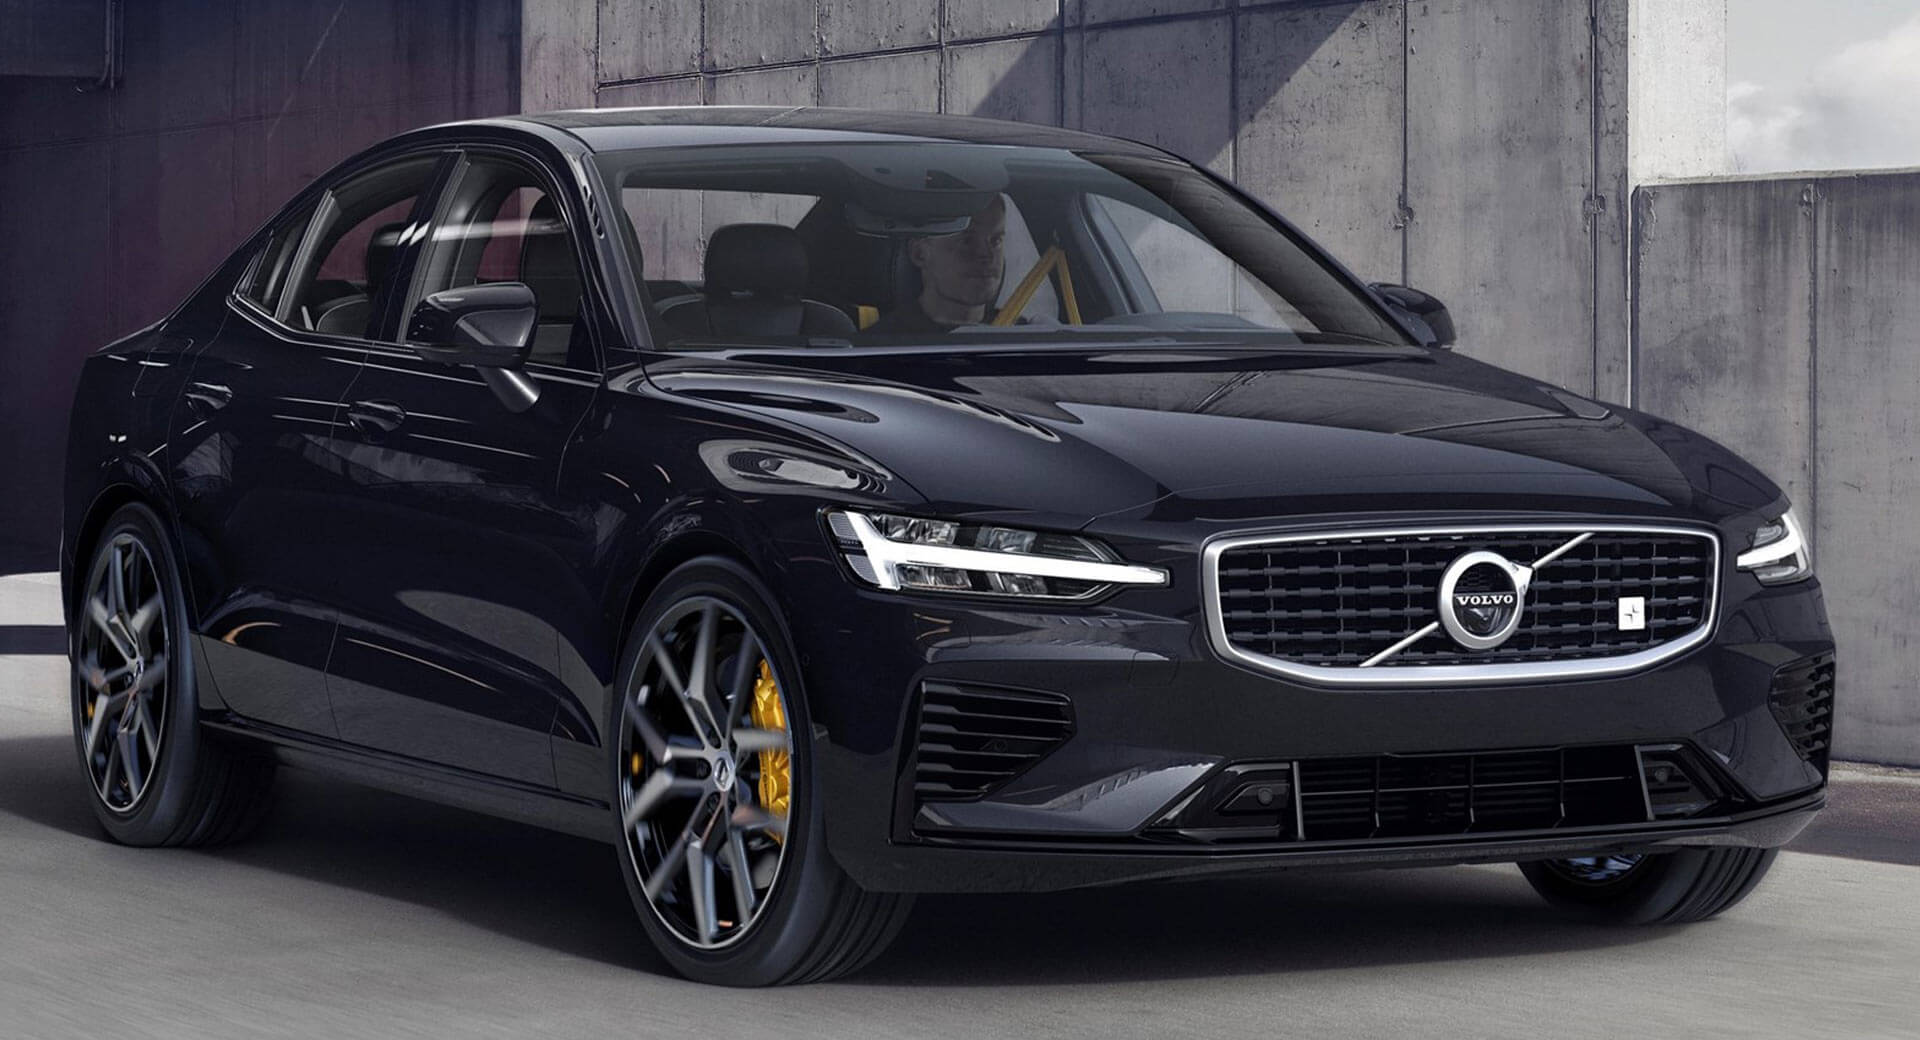 2019 Volvo S60 Priced From $35,800, Subscription Starts At ...
